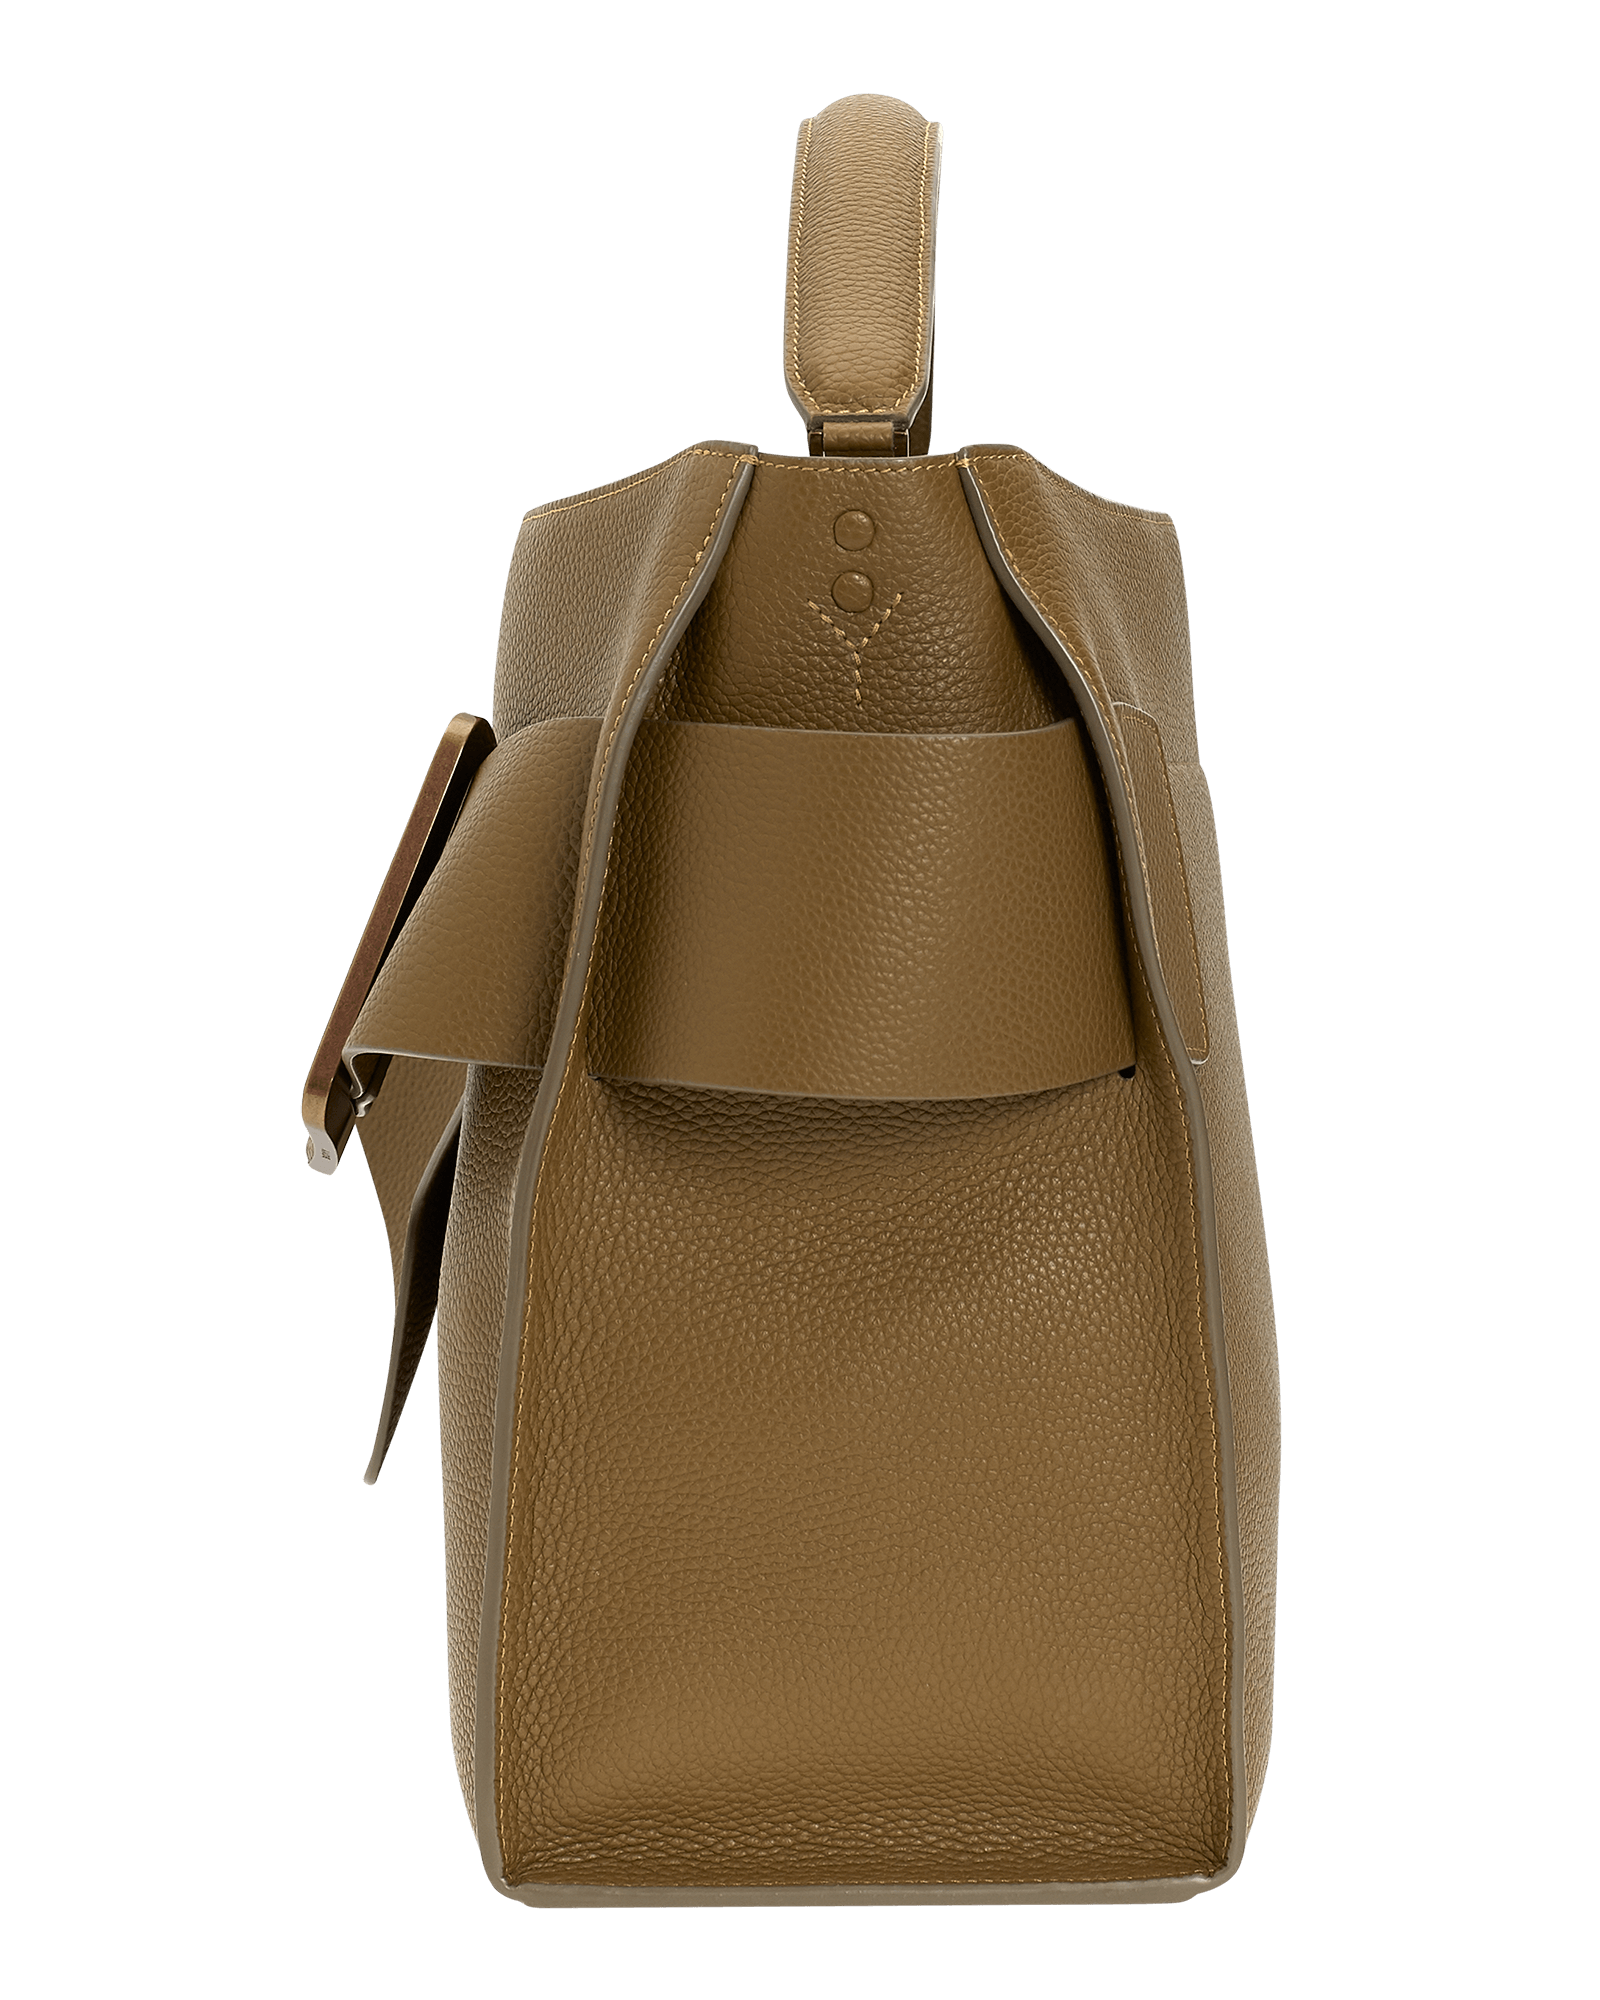 Open, soft brown natural grain leather handbag with a single carry handle, oversized front buckle detail and top zip fastener.